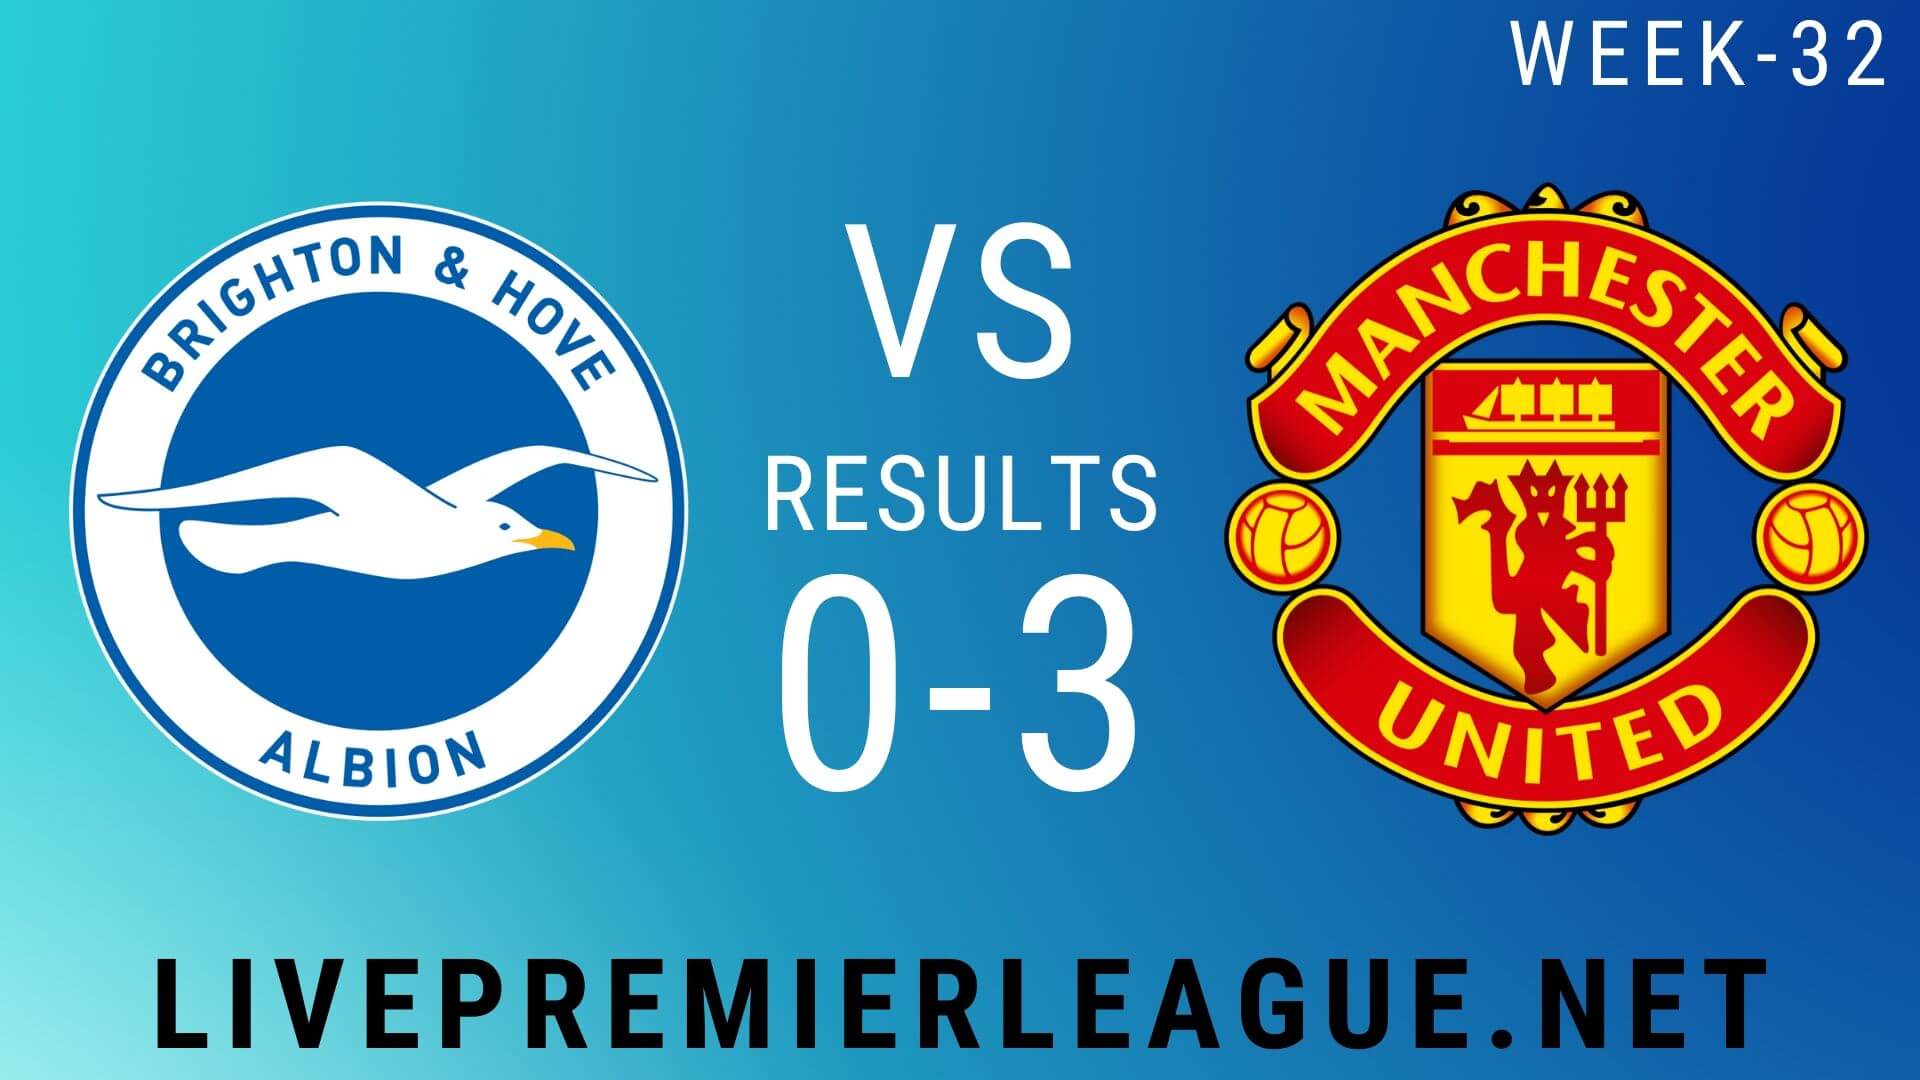 Brighton and Hove Albion Vs Manchester United | Week 32 Result 2020